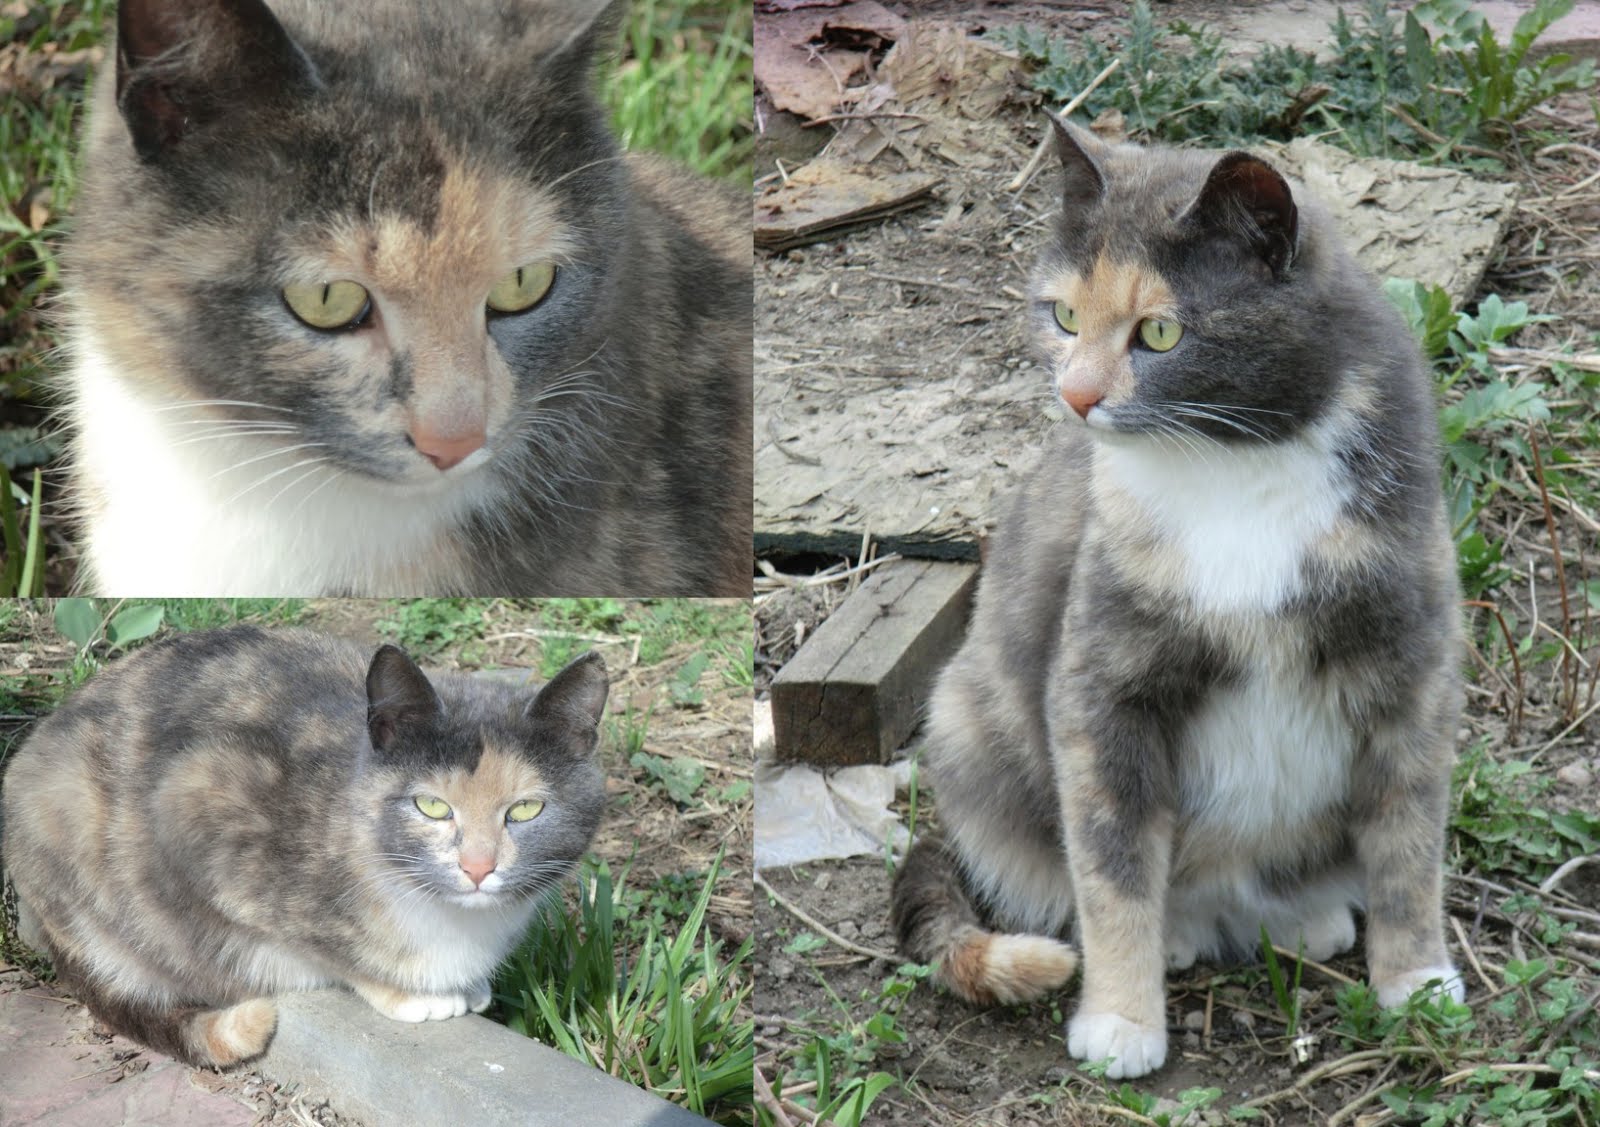 The outside cat, Mishi